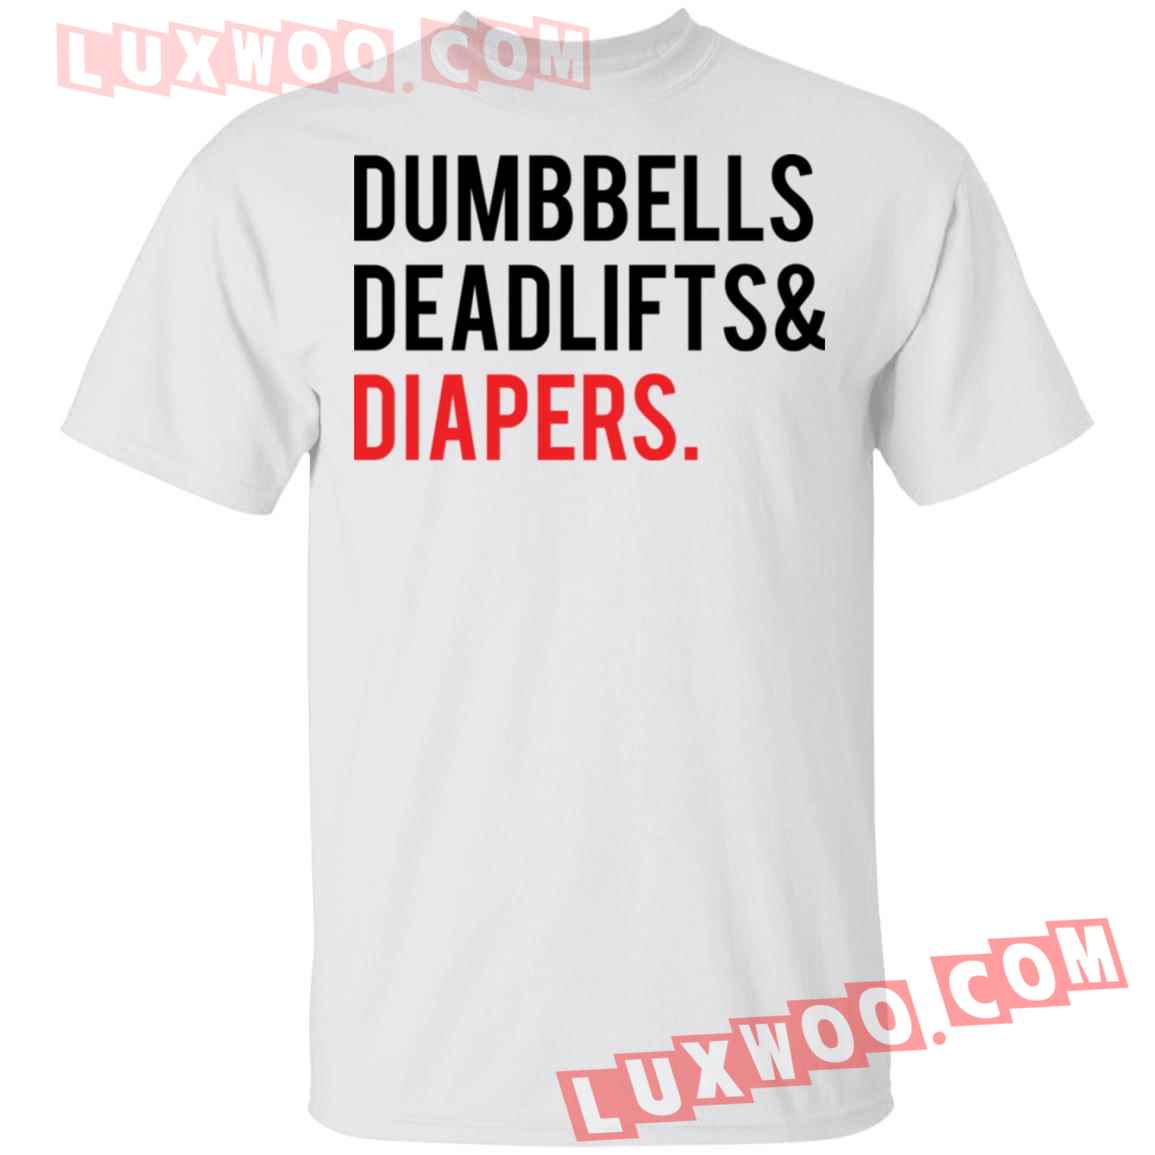 Dumbbells Deadlifts And Diapers Shirt - Luxwoo.com